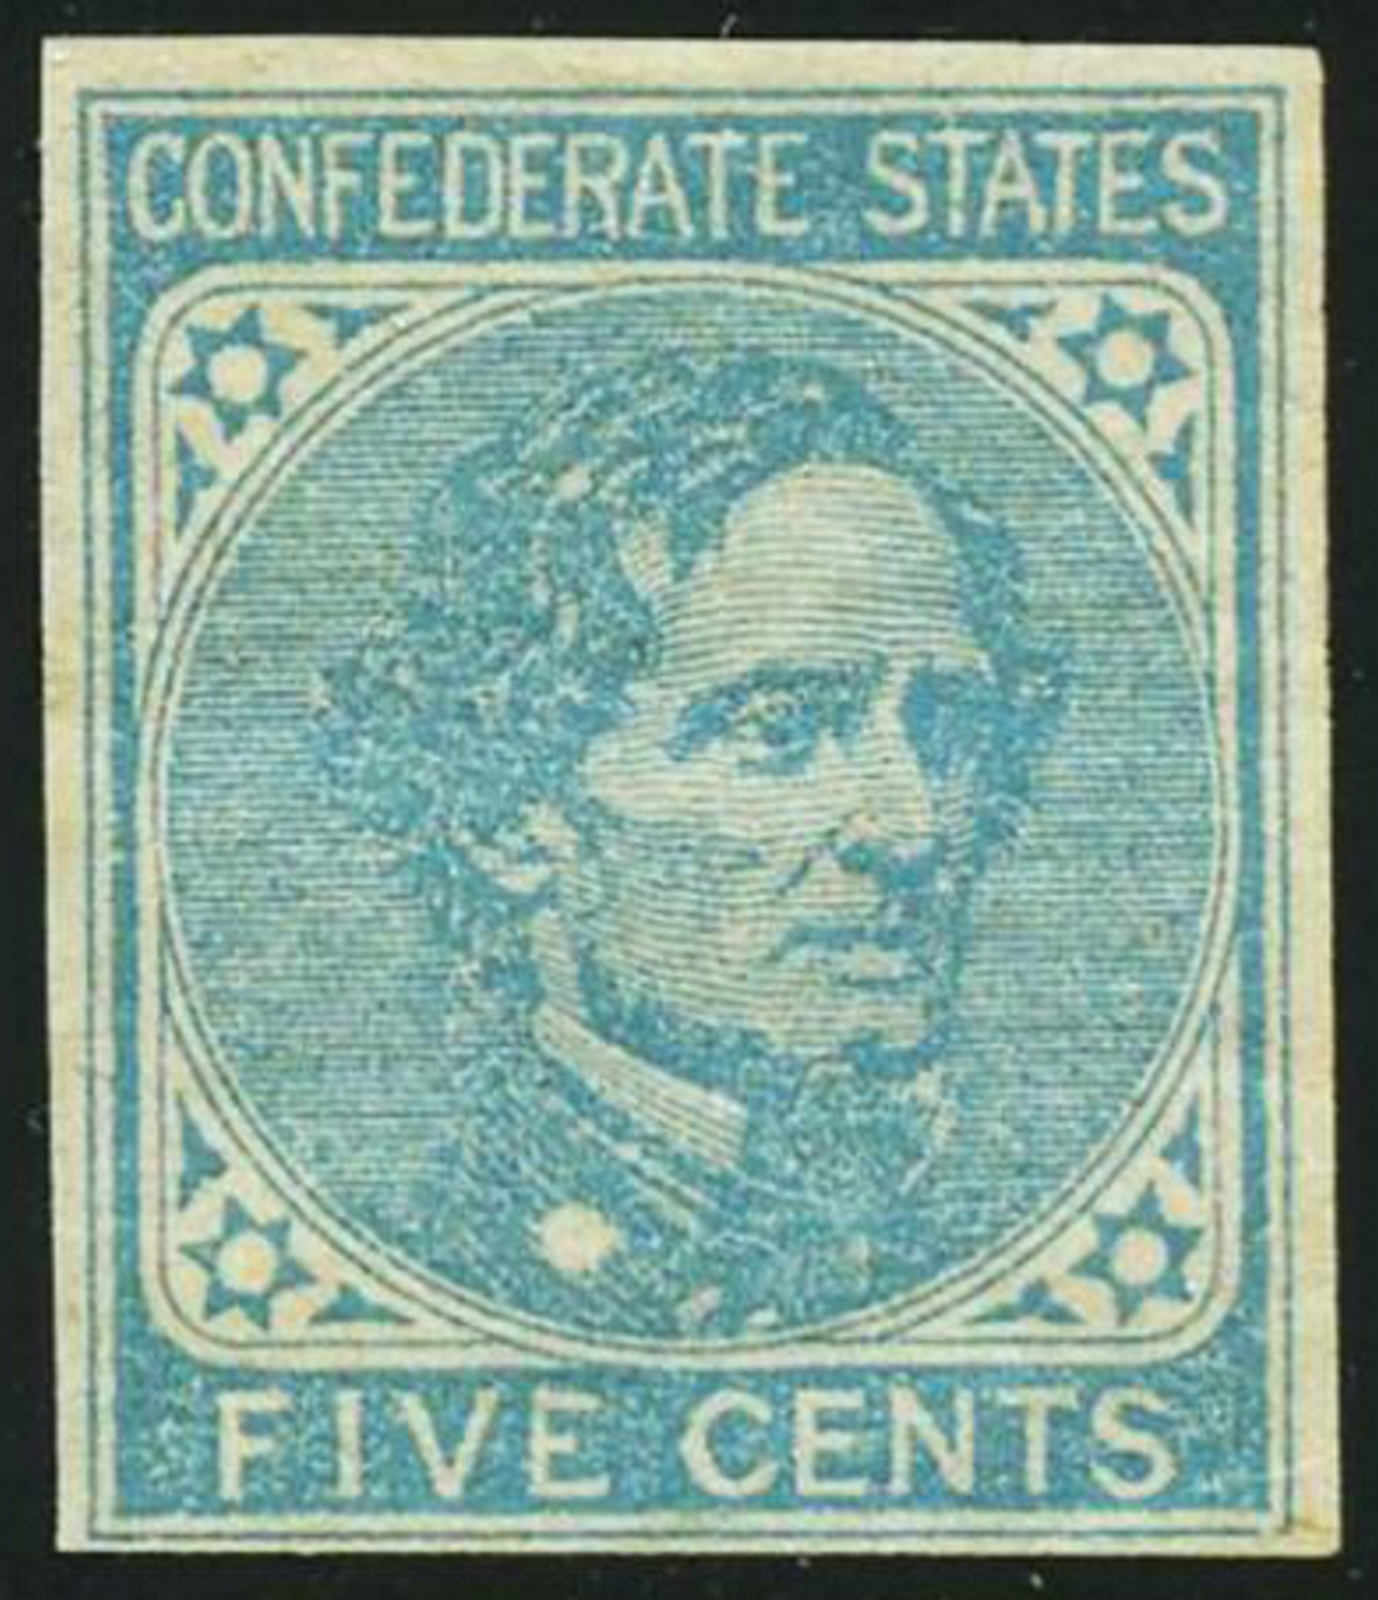 Confederate States of America #7  5c Blue  Used Minor Defects #CSA007_usedmd